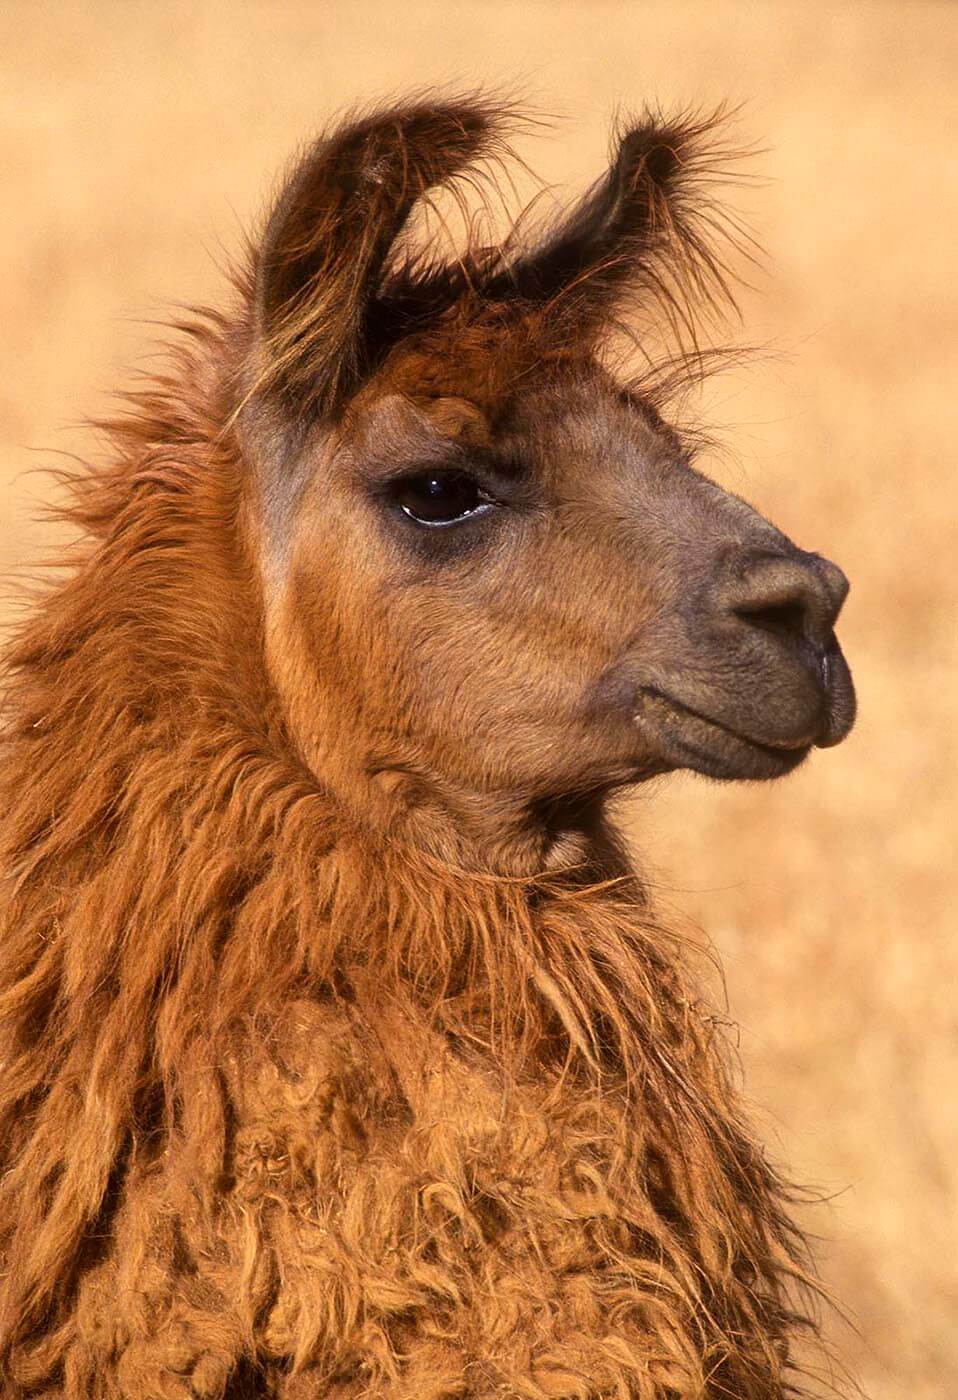 Pure bred brown LLAMA on a farm in CALIFORNIA. -  Agriculture photography by Craig Lovell